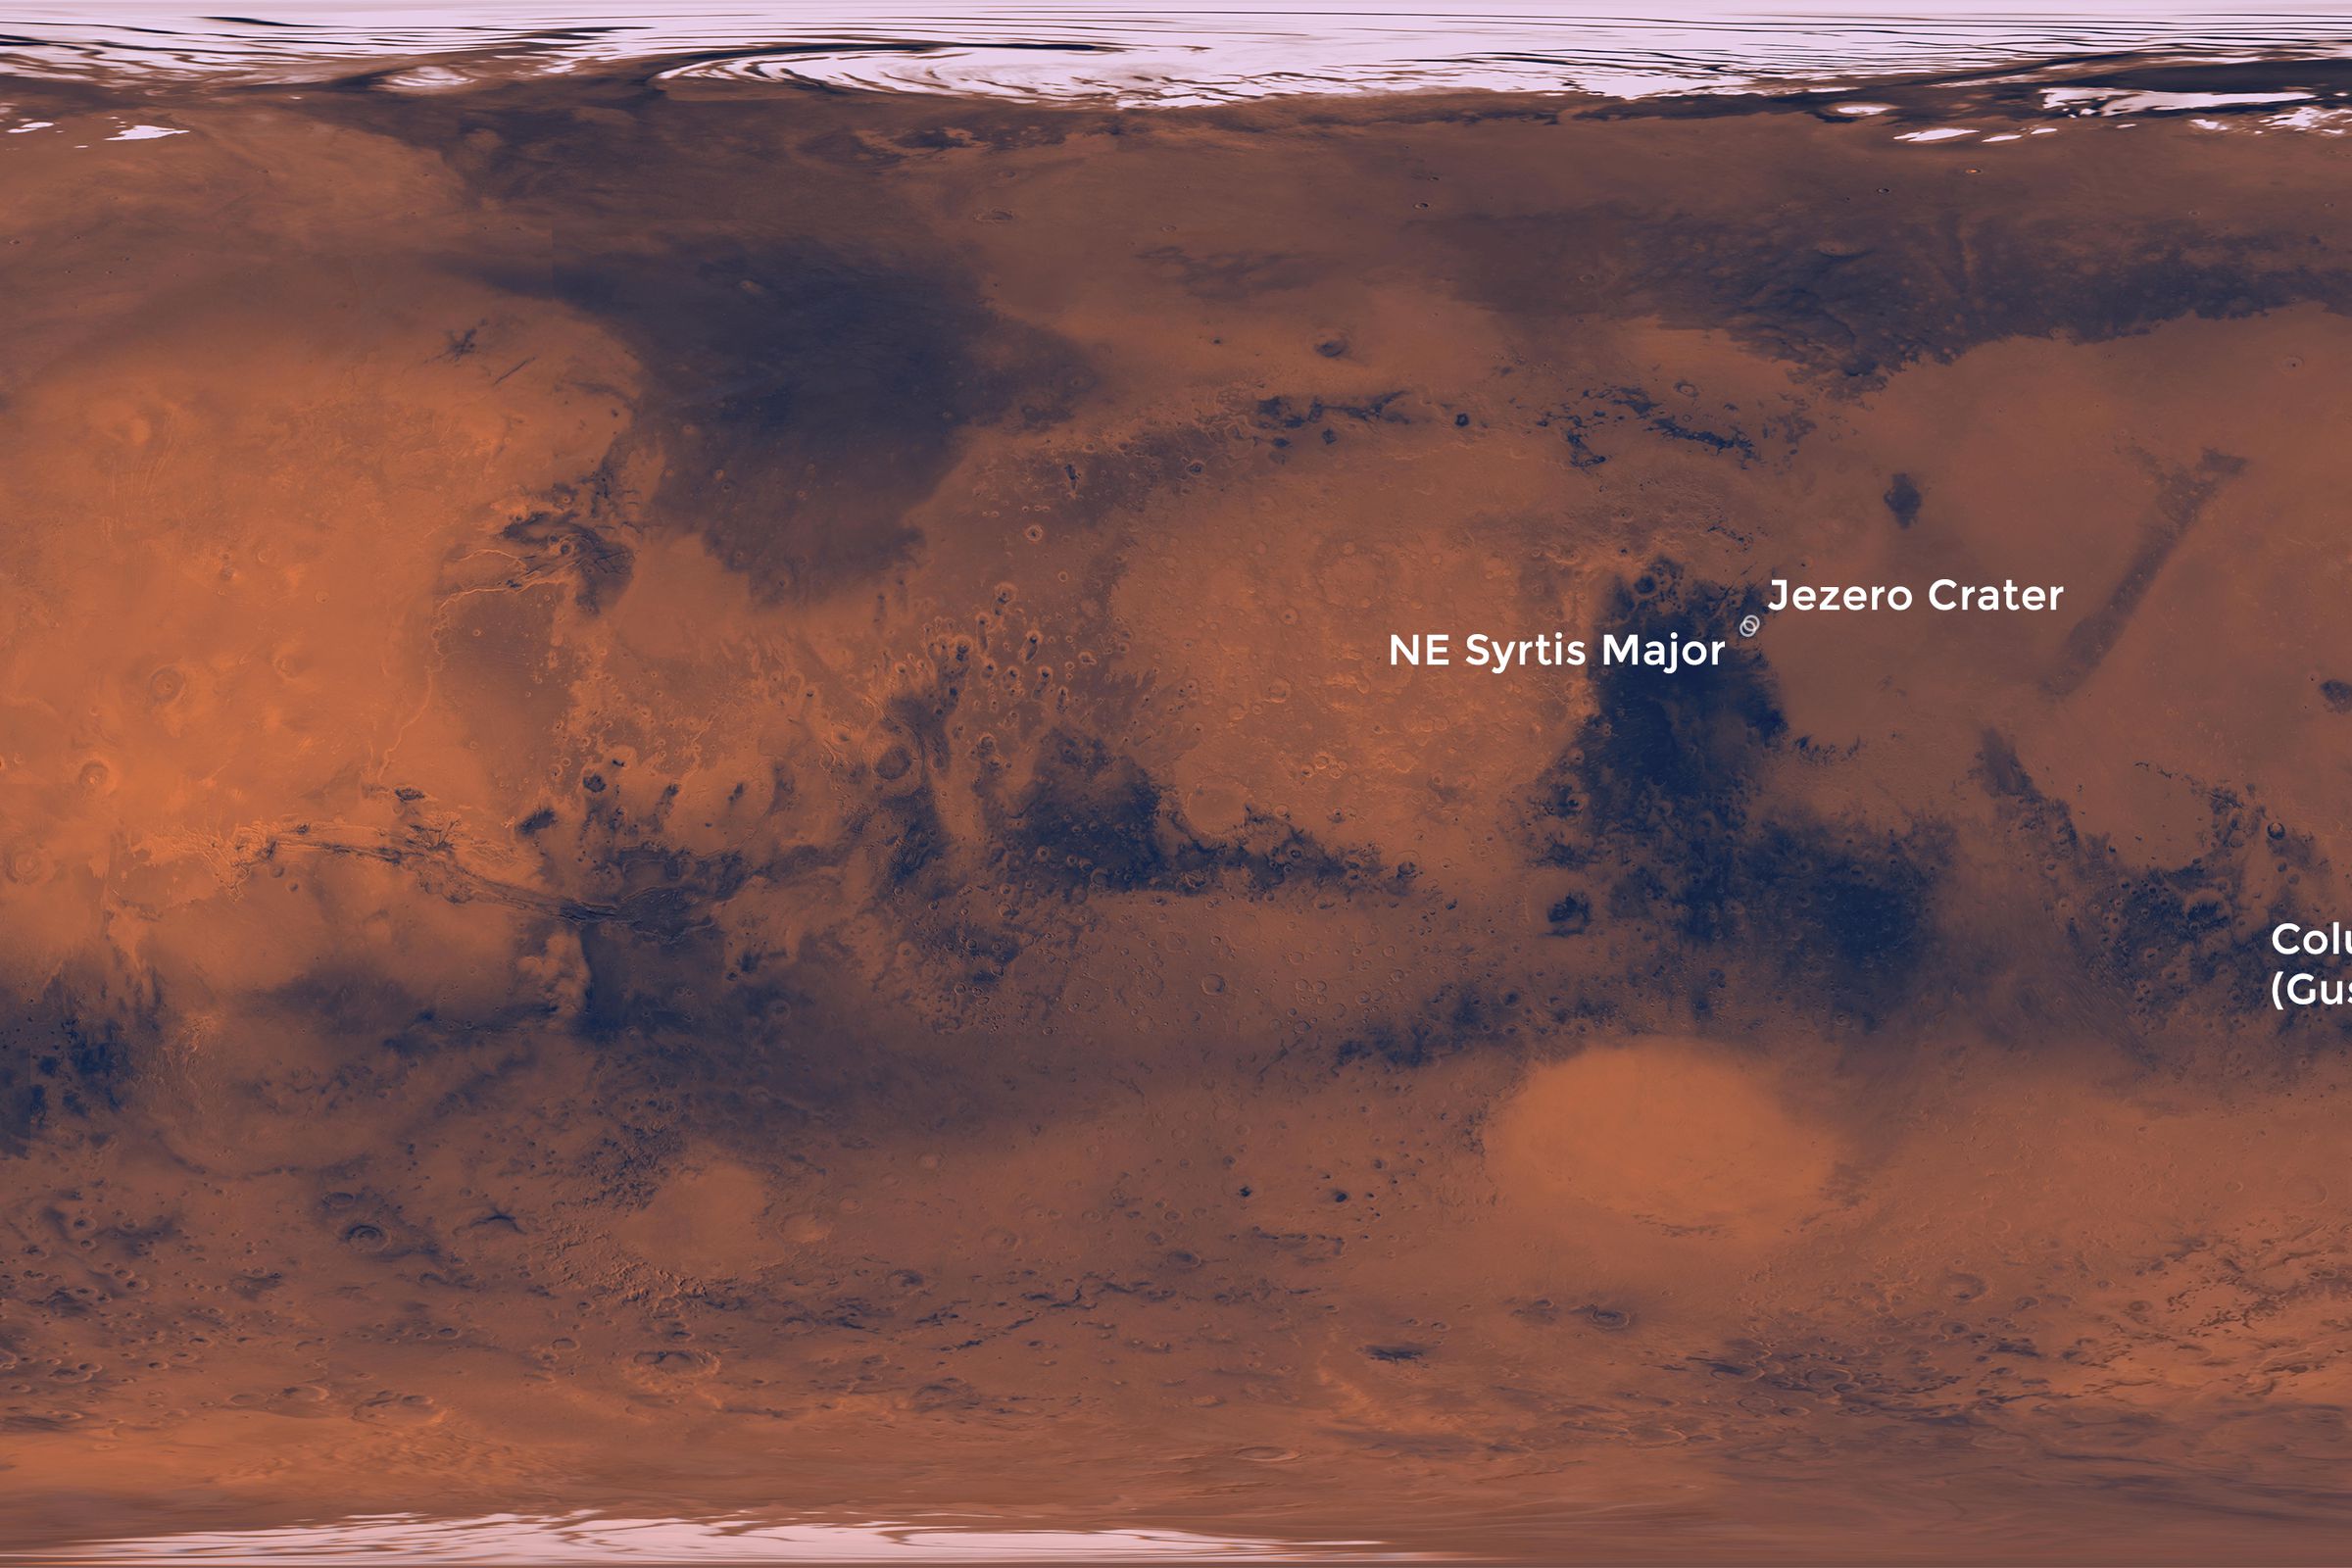 The three final landing sites for Mars 2020.